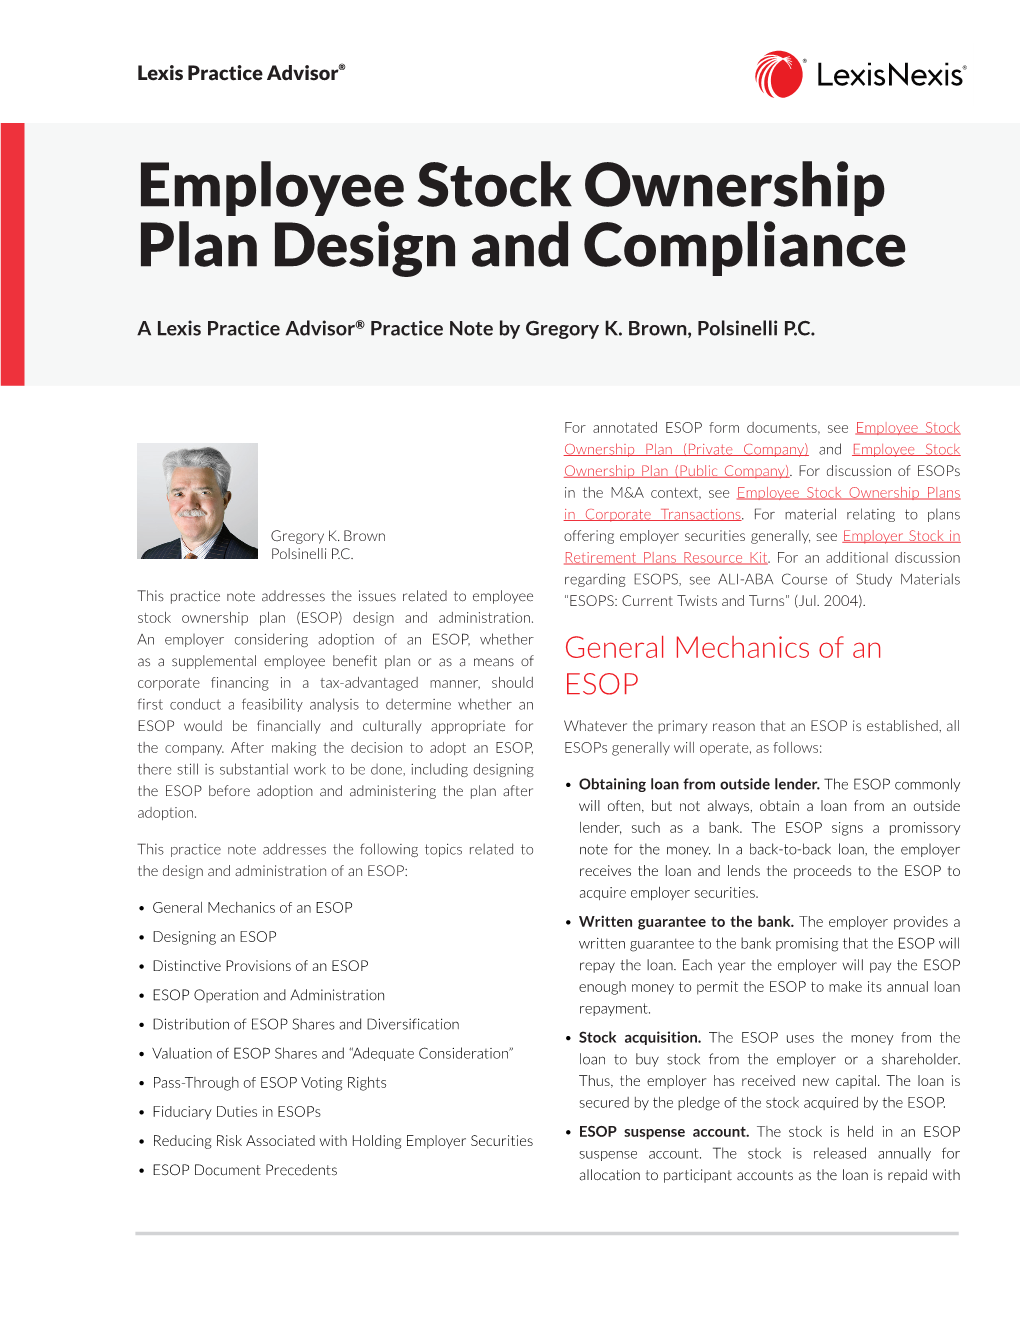 Employee Stock Ownership Plan Design and Compliance